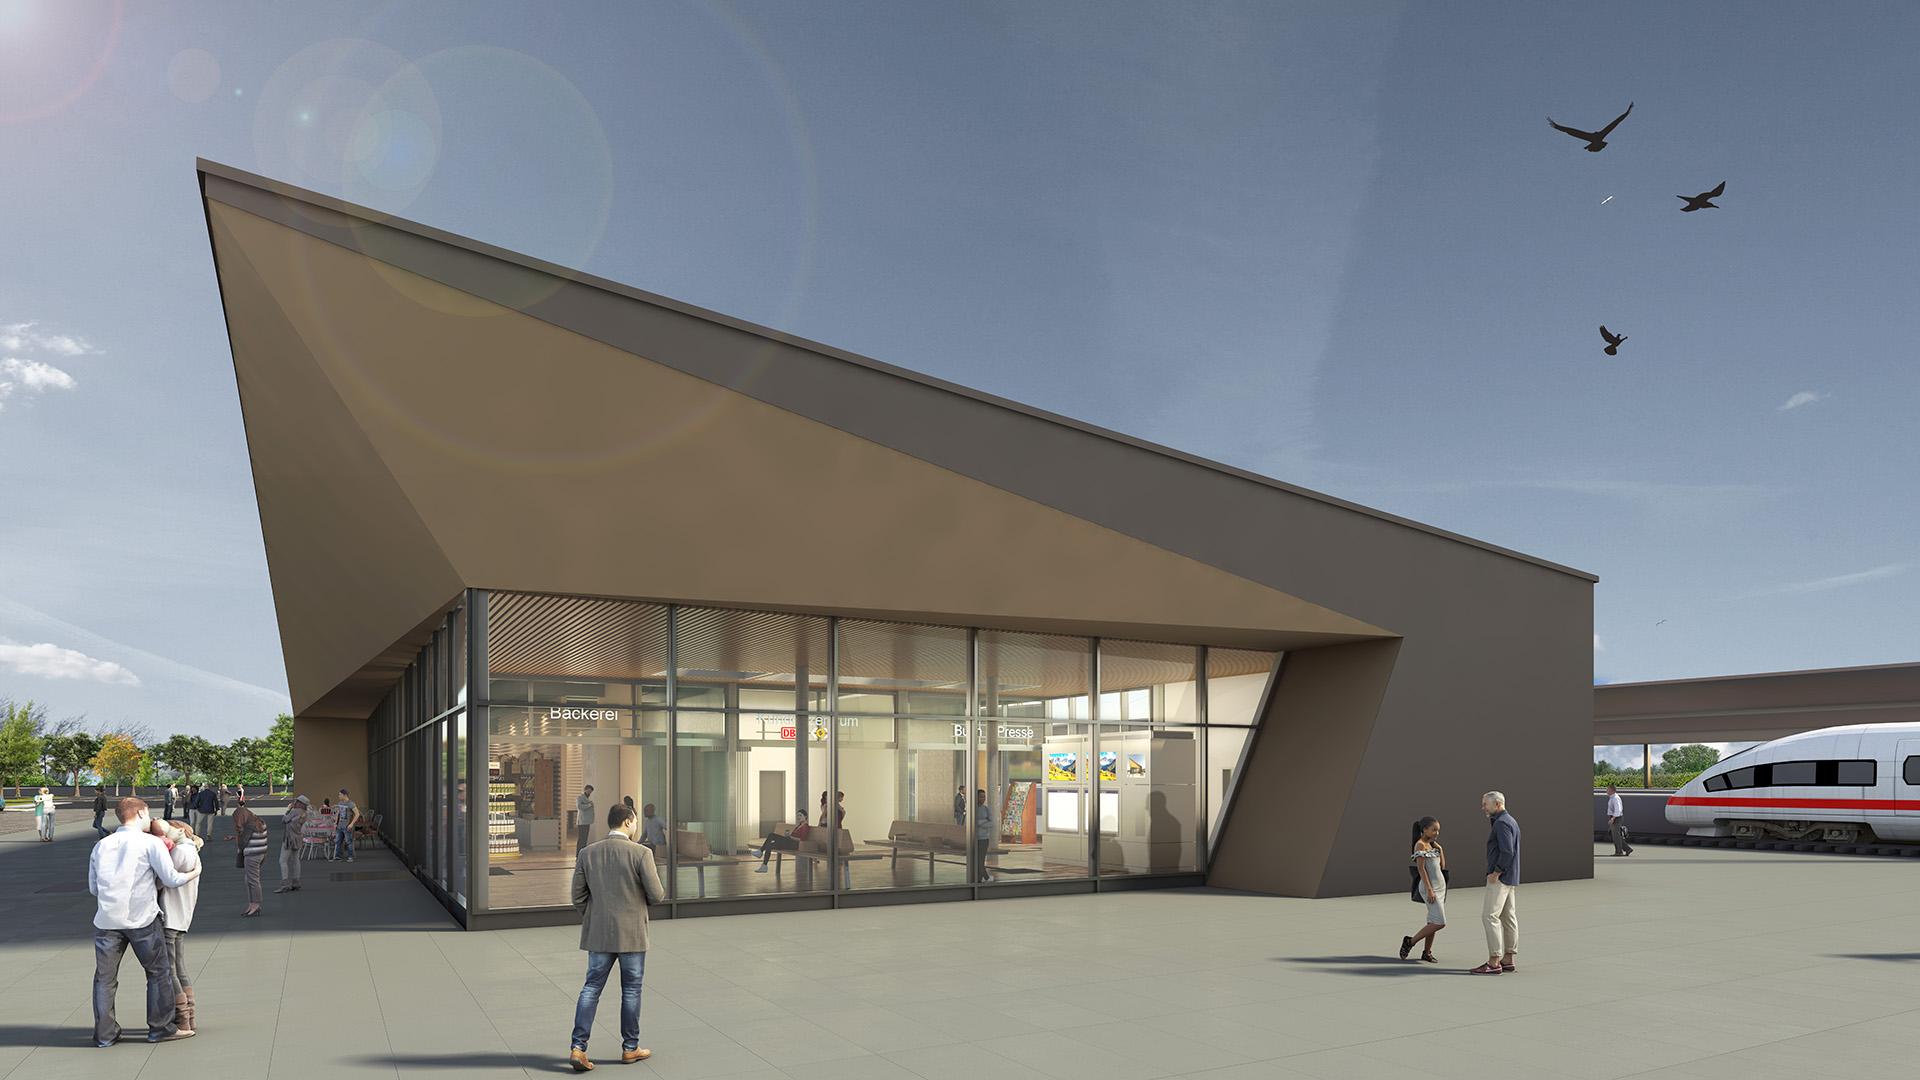 A visualisation of the new station building at the station Bitterfeld.